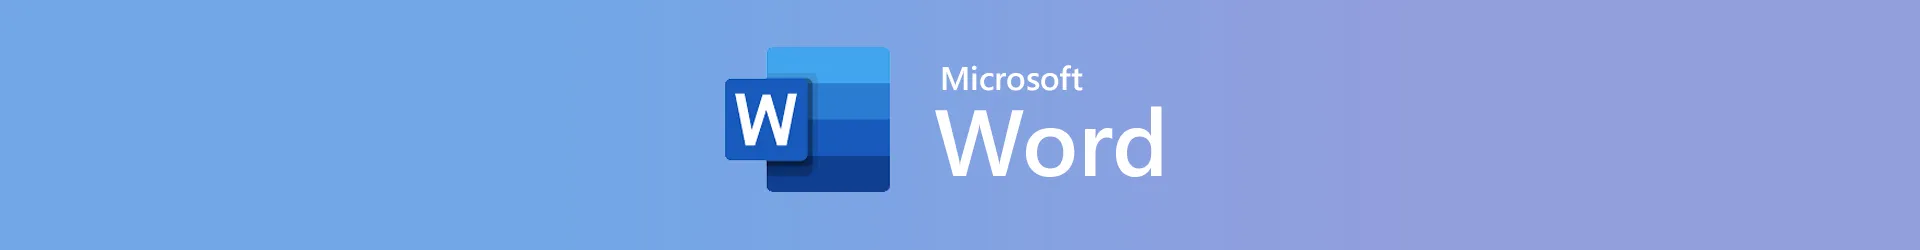 Formation Microsoft Office Word 2019